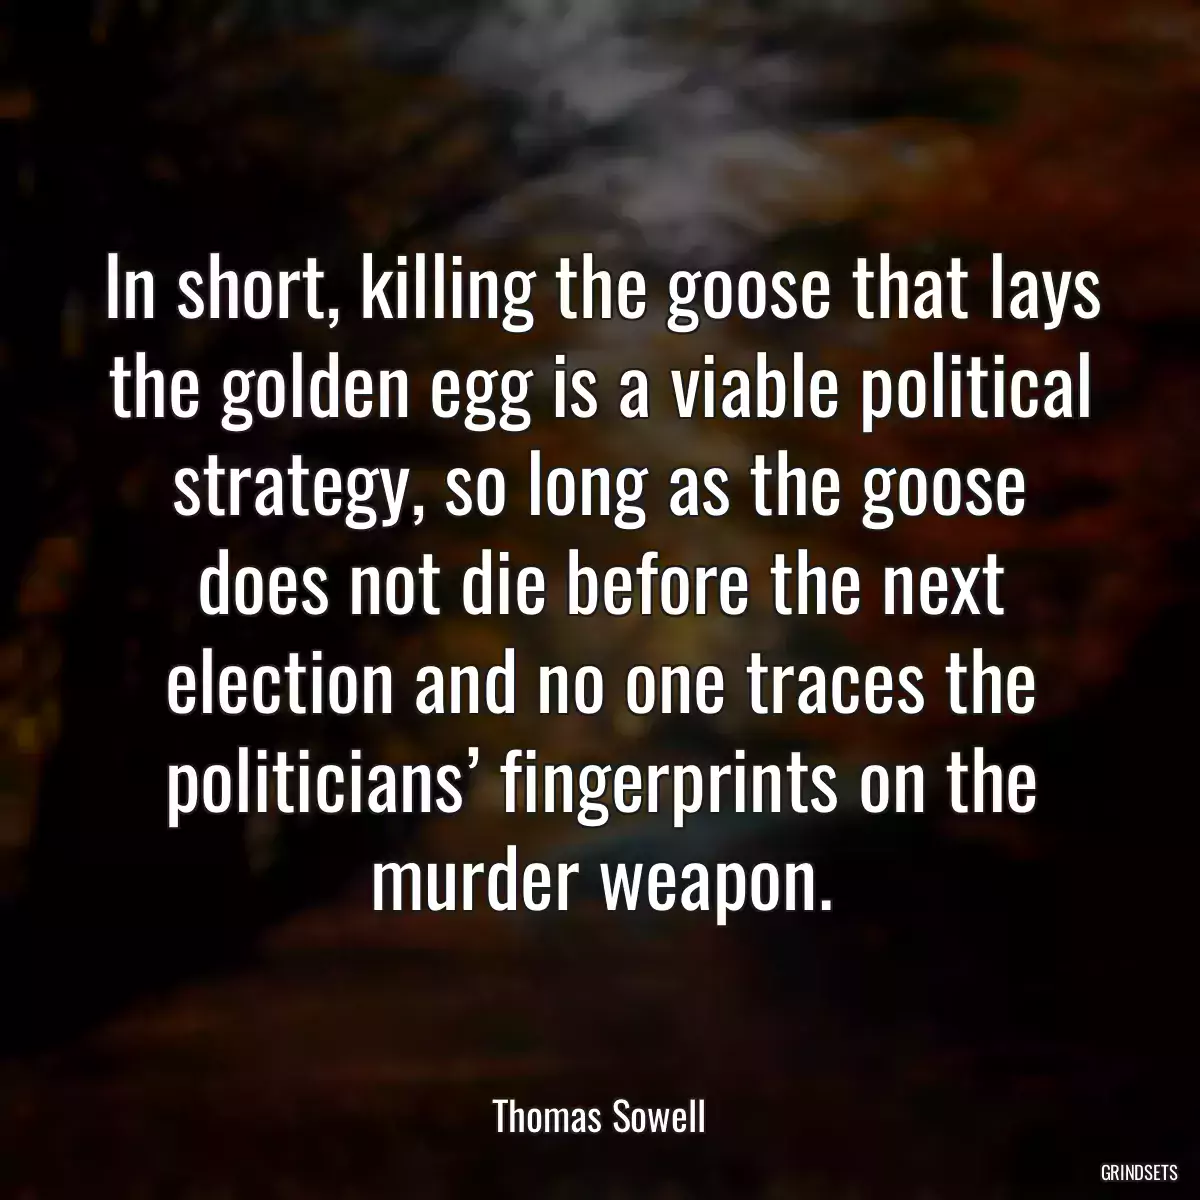 In short, killing the goose that lays the golden egg is a viable political strategy, so long as the goose does not die before the next election and no one traces the politicians’ fingerprints on the murder weapon.